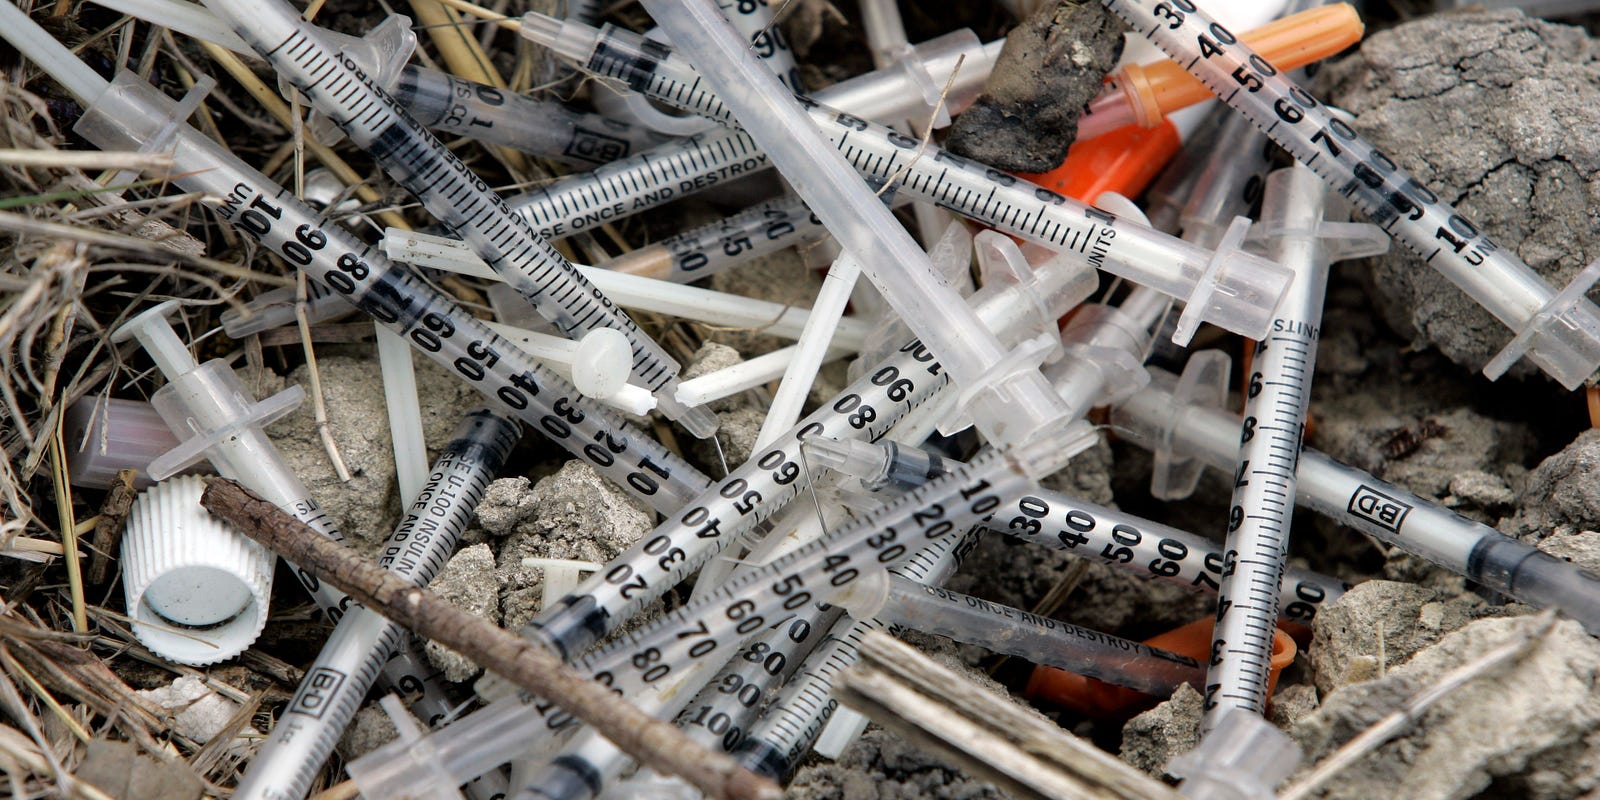 Needle-exchange Programs Are More Accepted By Republican States